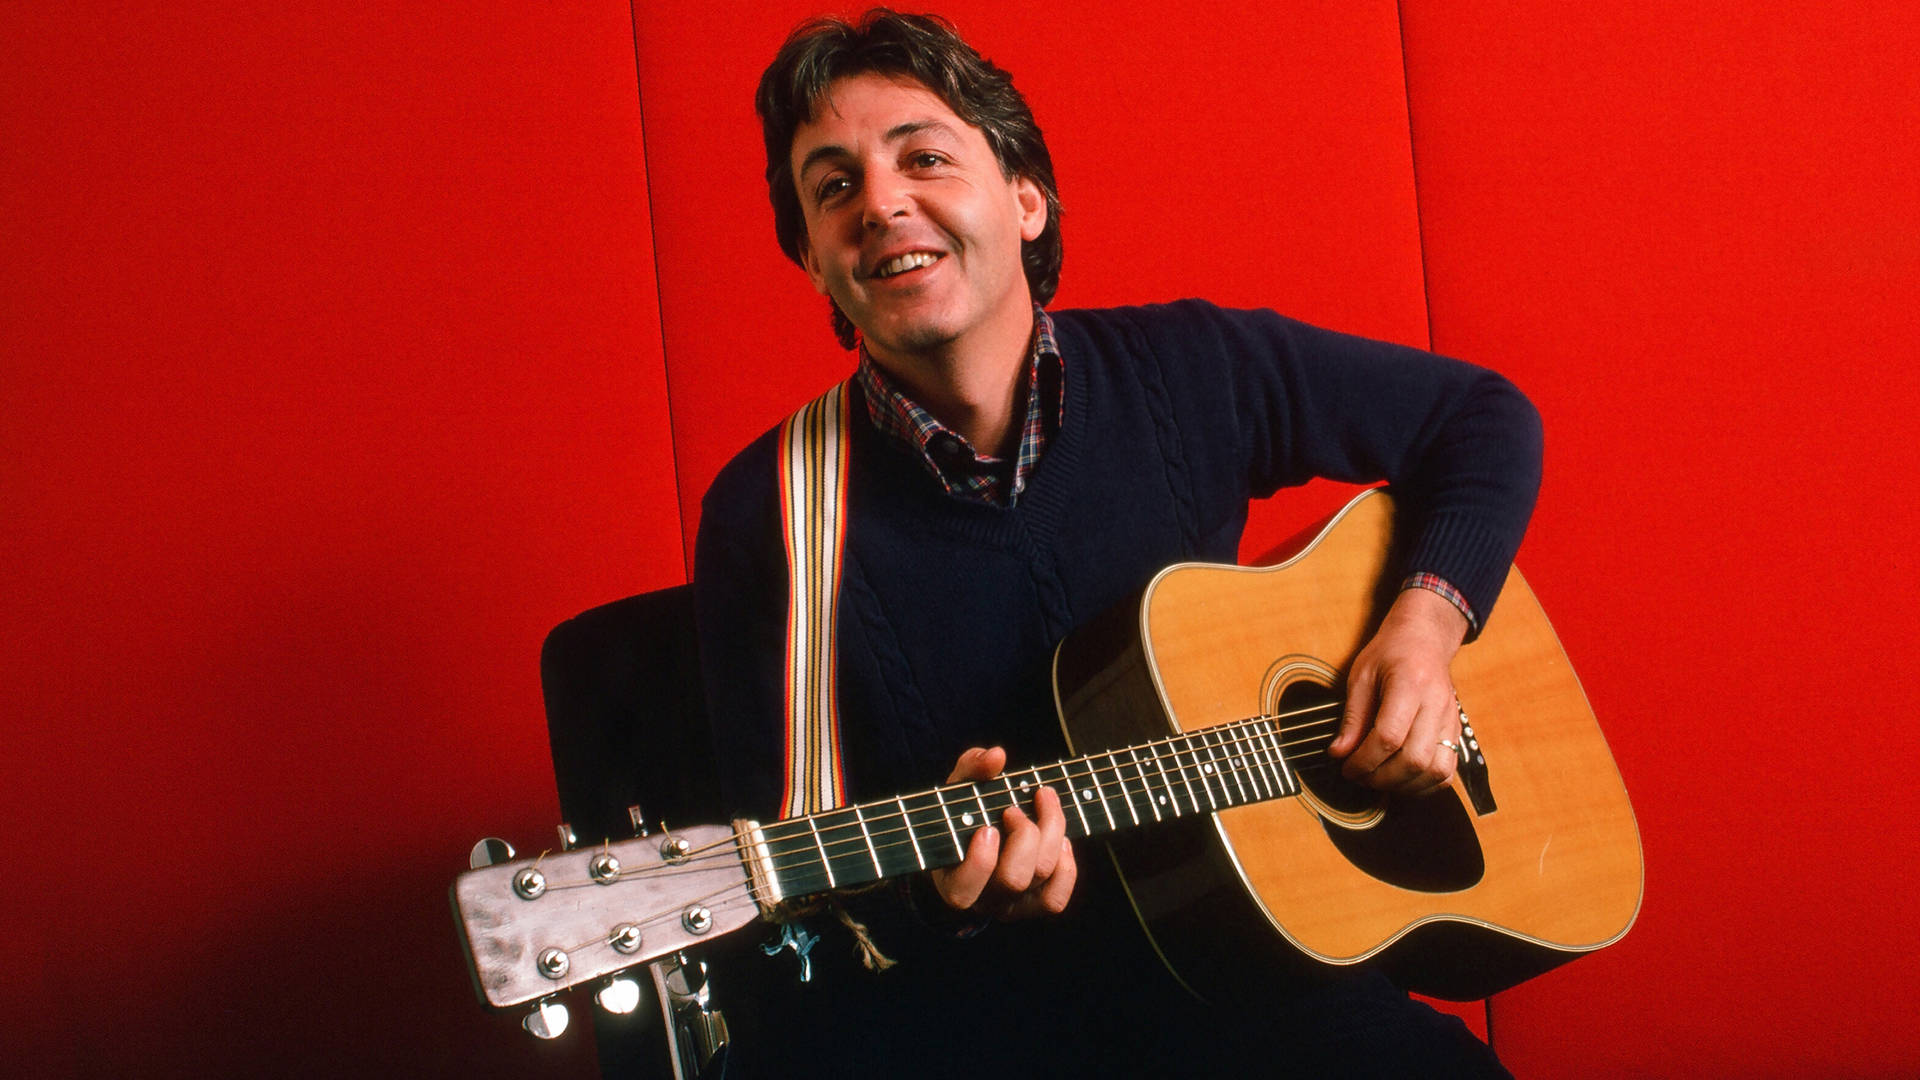 Paul Mccartney Young Red Background Background